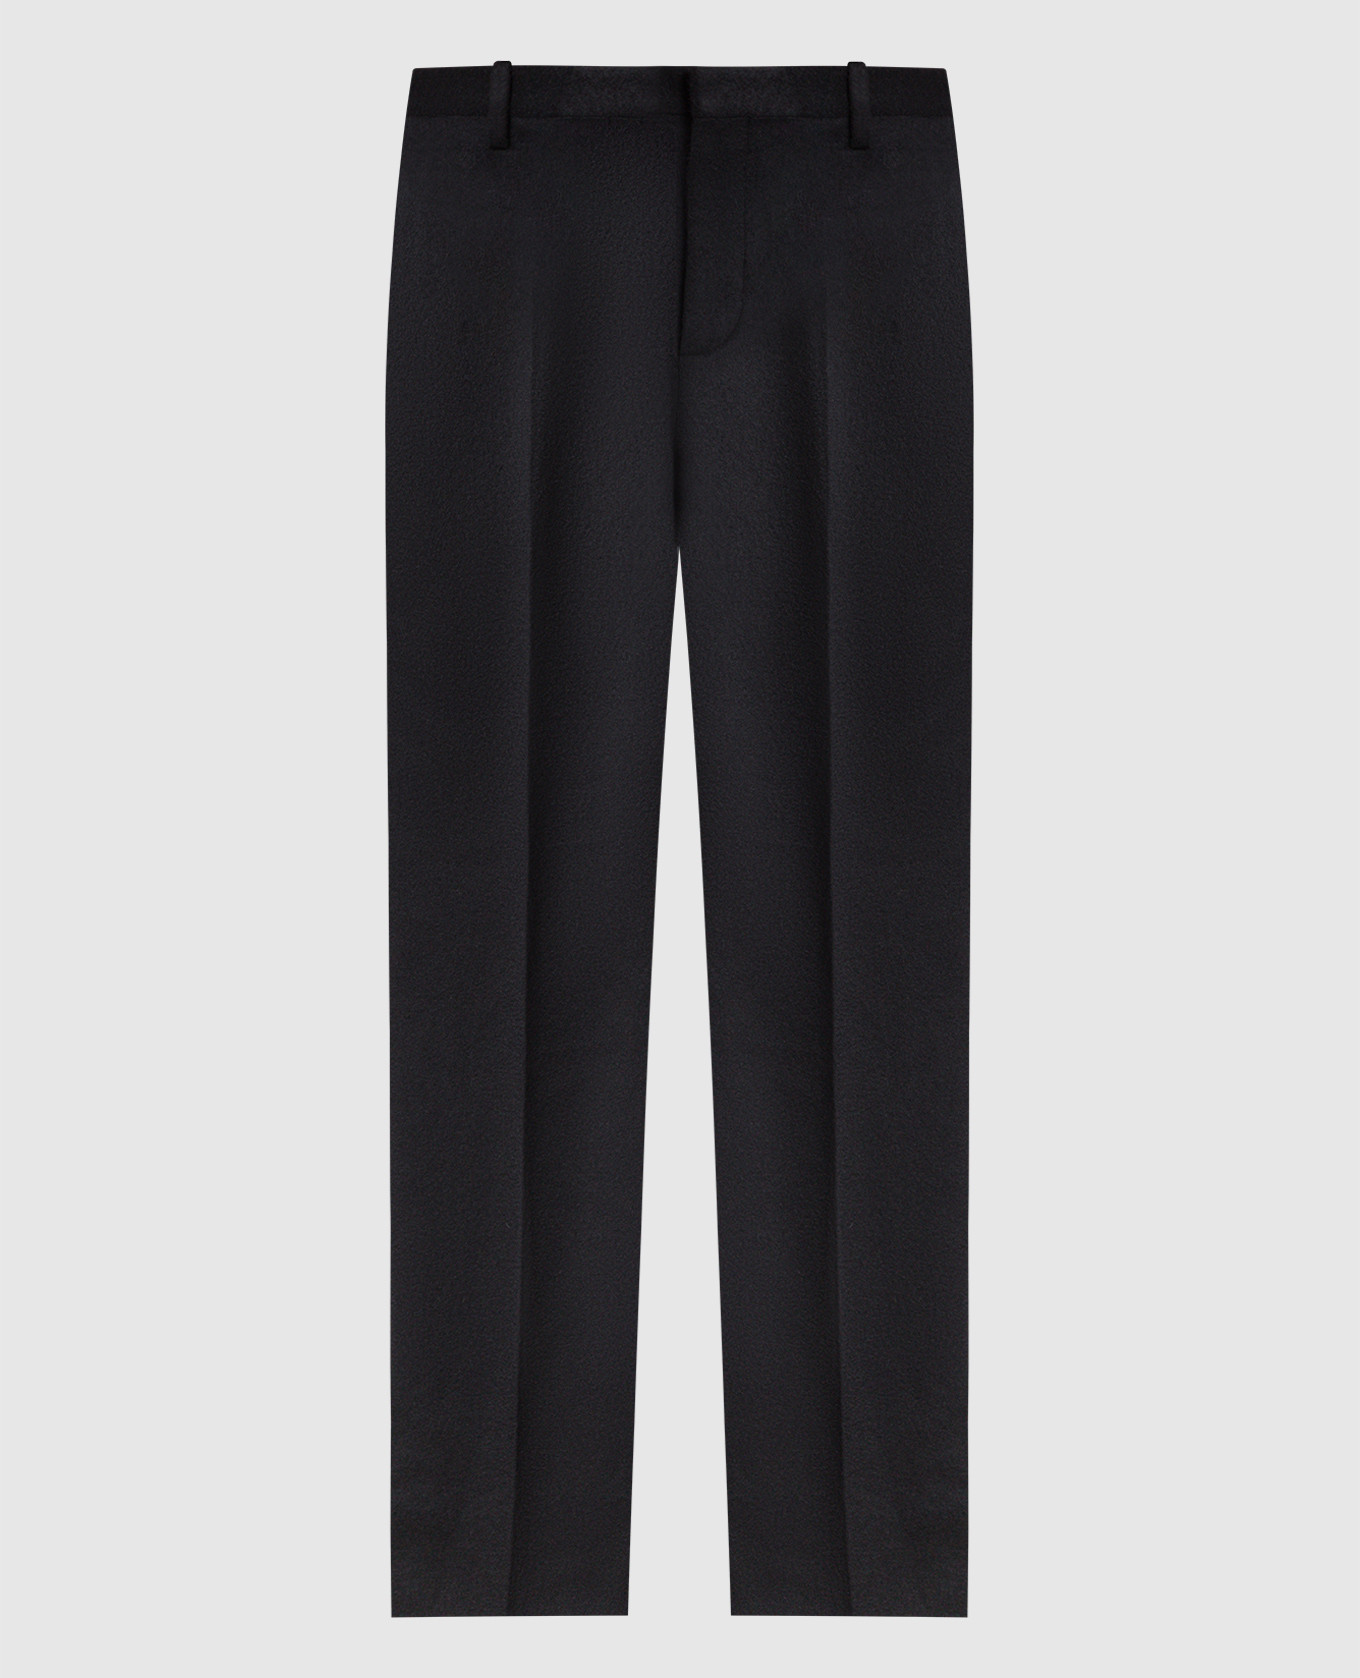 Black cashmere trousers with logo patch